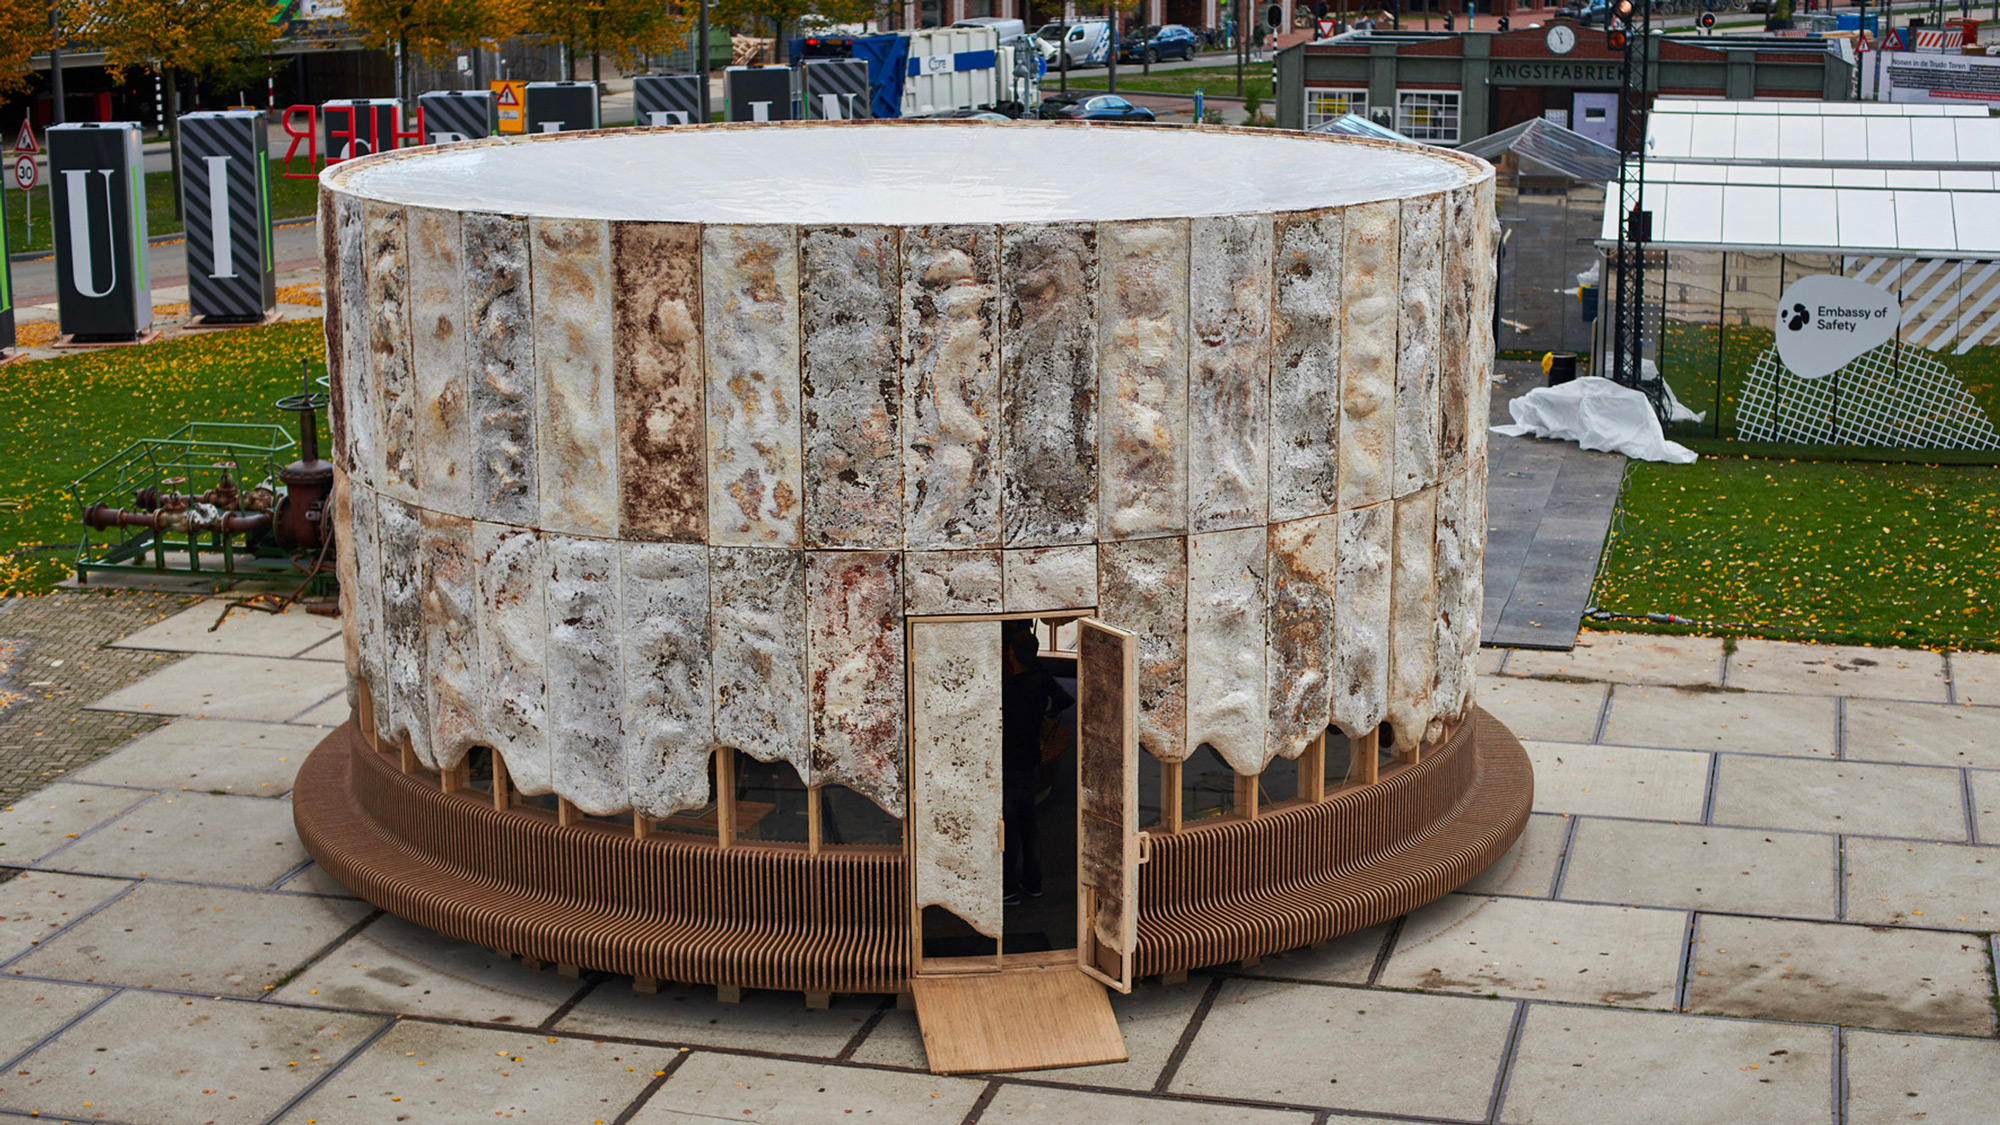 Mushrooms, Cattail Reeds, and Agricultural Waste are Reimagined to Construct “The Growing Pavilion”